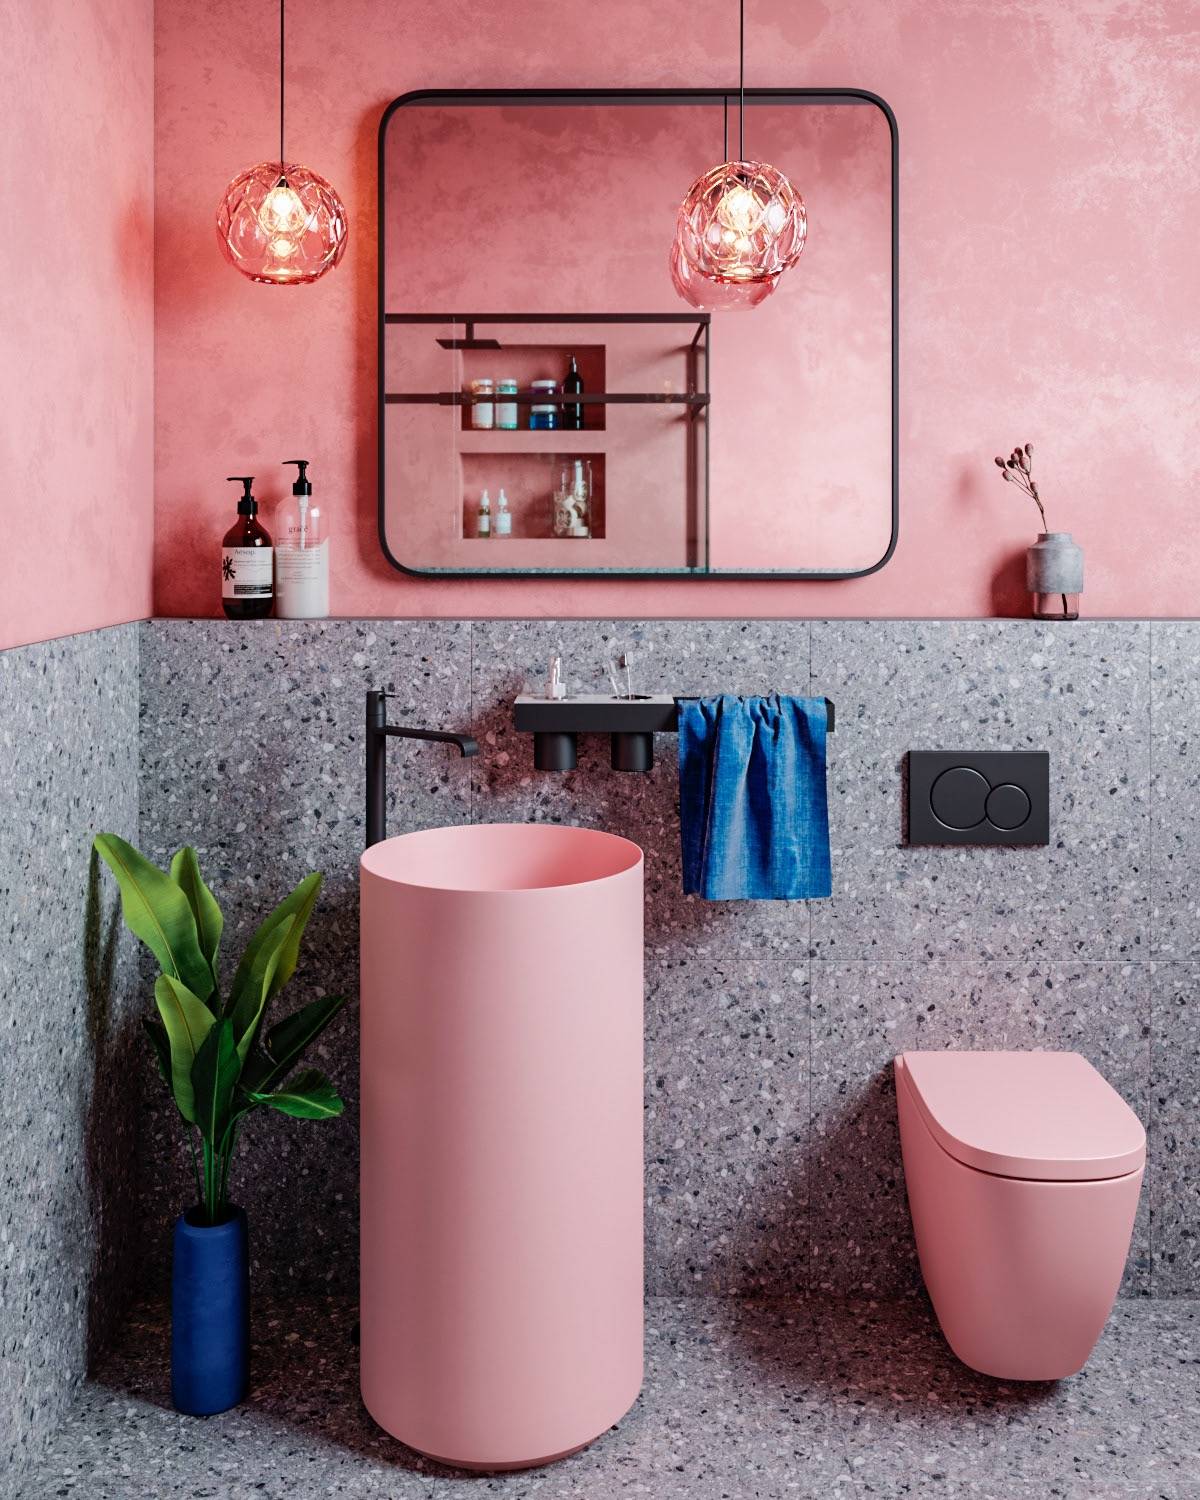 A Modern Using A Pink Sink and Toilet [Photo by Visualizer- Kate Tsyganina]